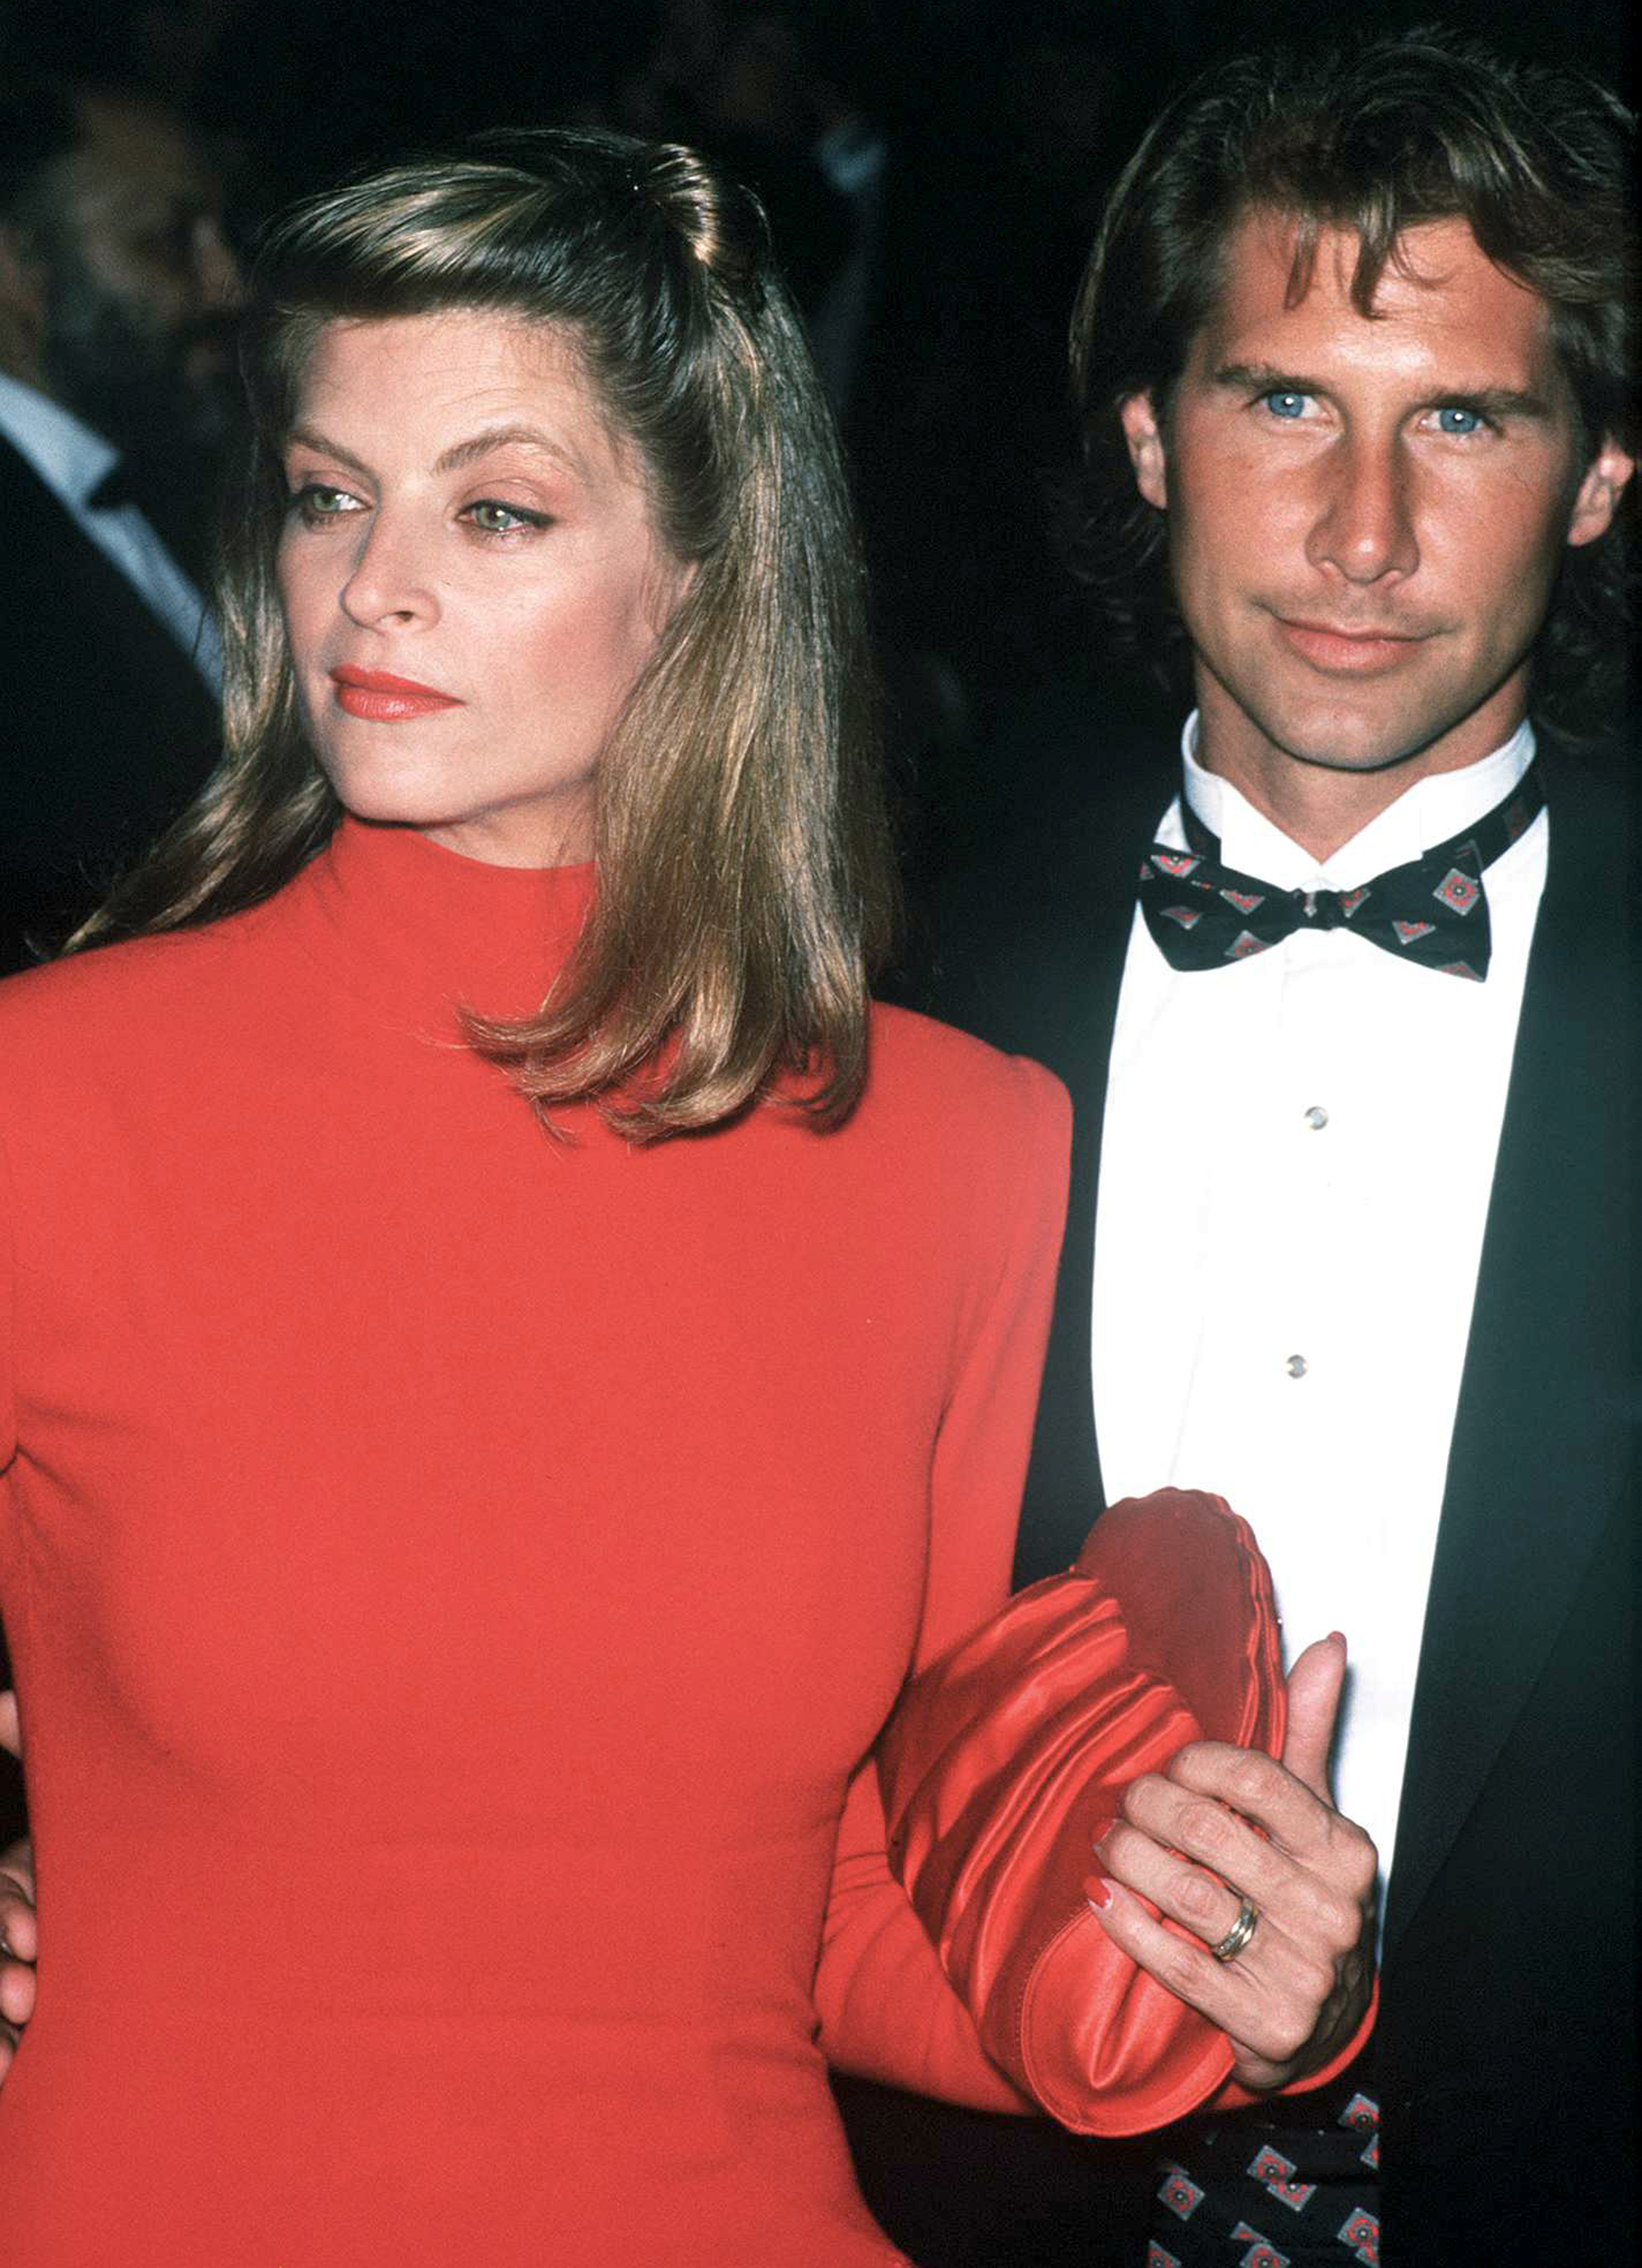 Kirstie Alley and Parker Stevenson photo taken in the 1990s | Source: Getty Images